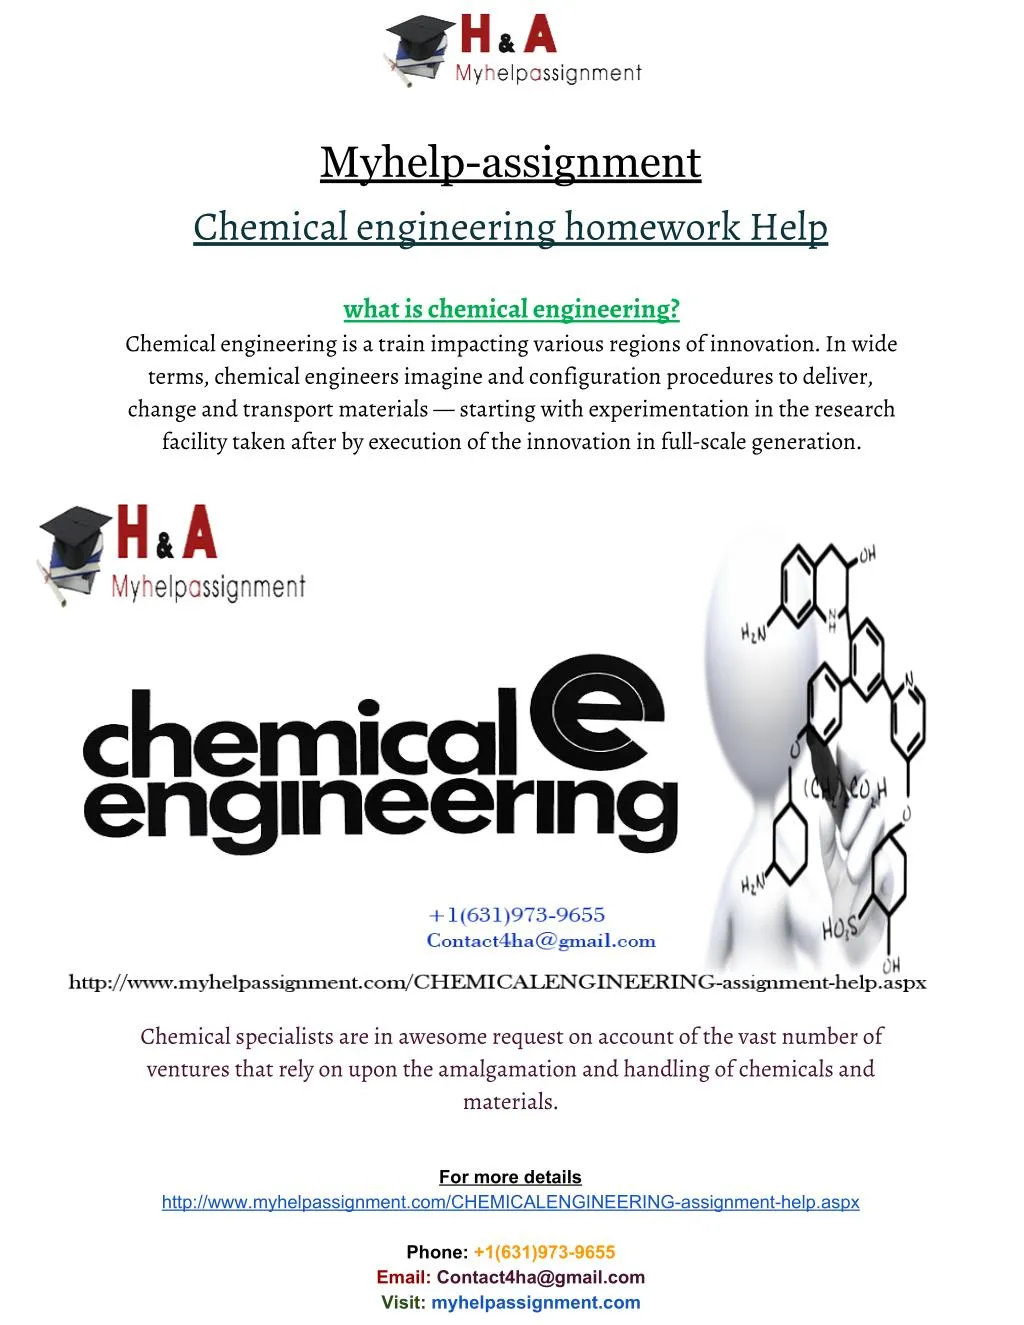 myhelp assignment chemical engineering homework